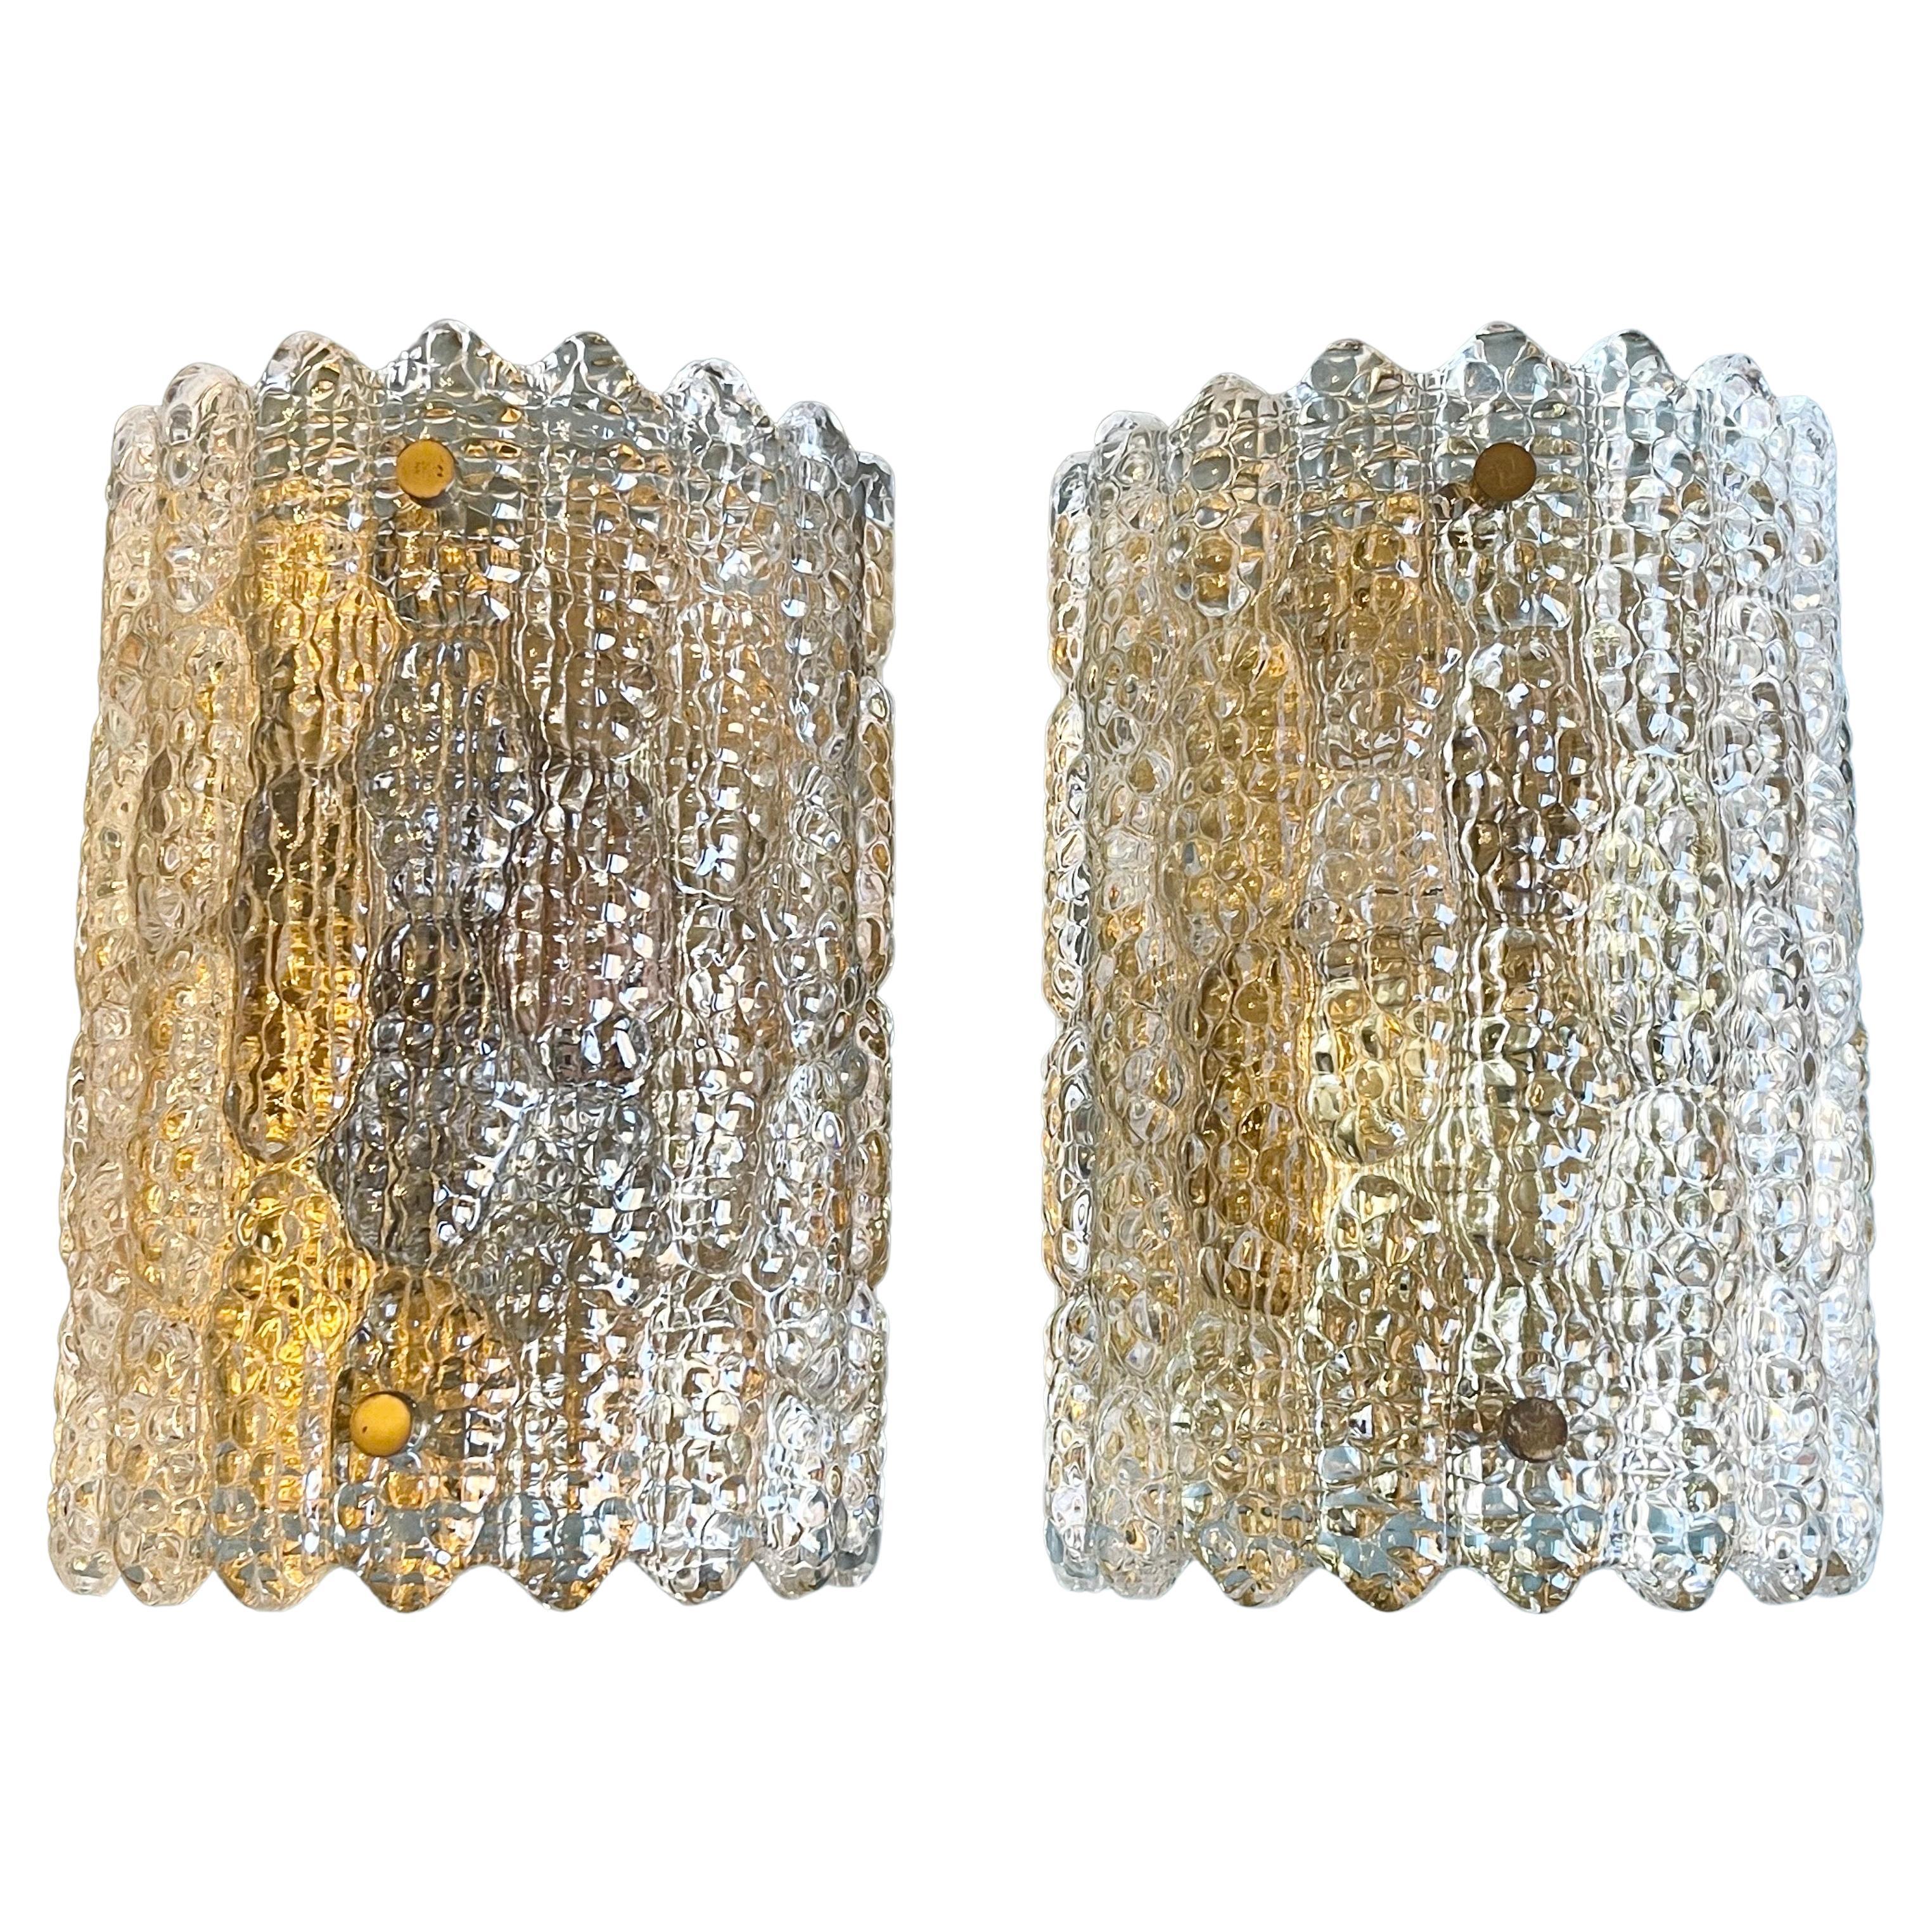 Set of Three Orrefors Wall Sconces by Carl Fagerlund, Sweden, circa 1950s For Sale